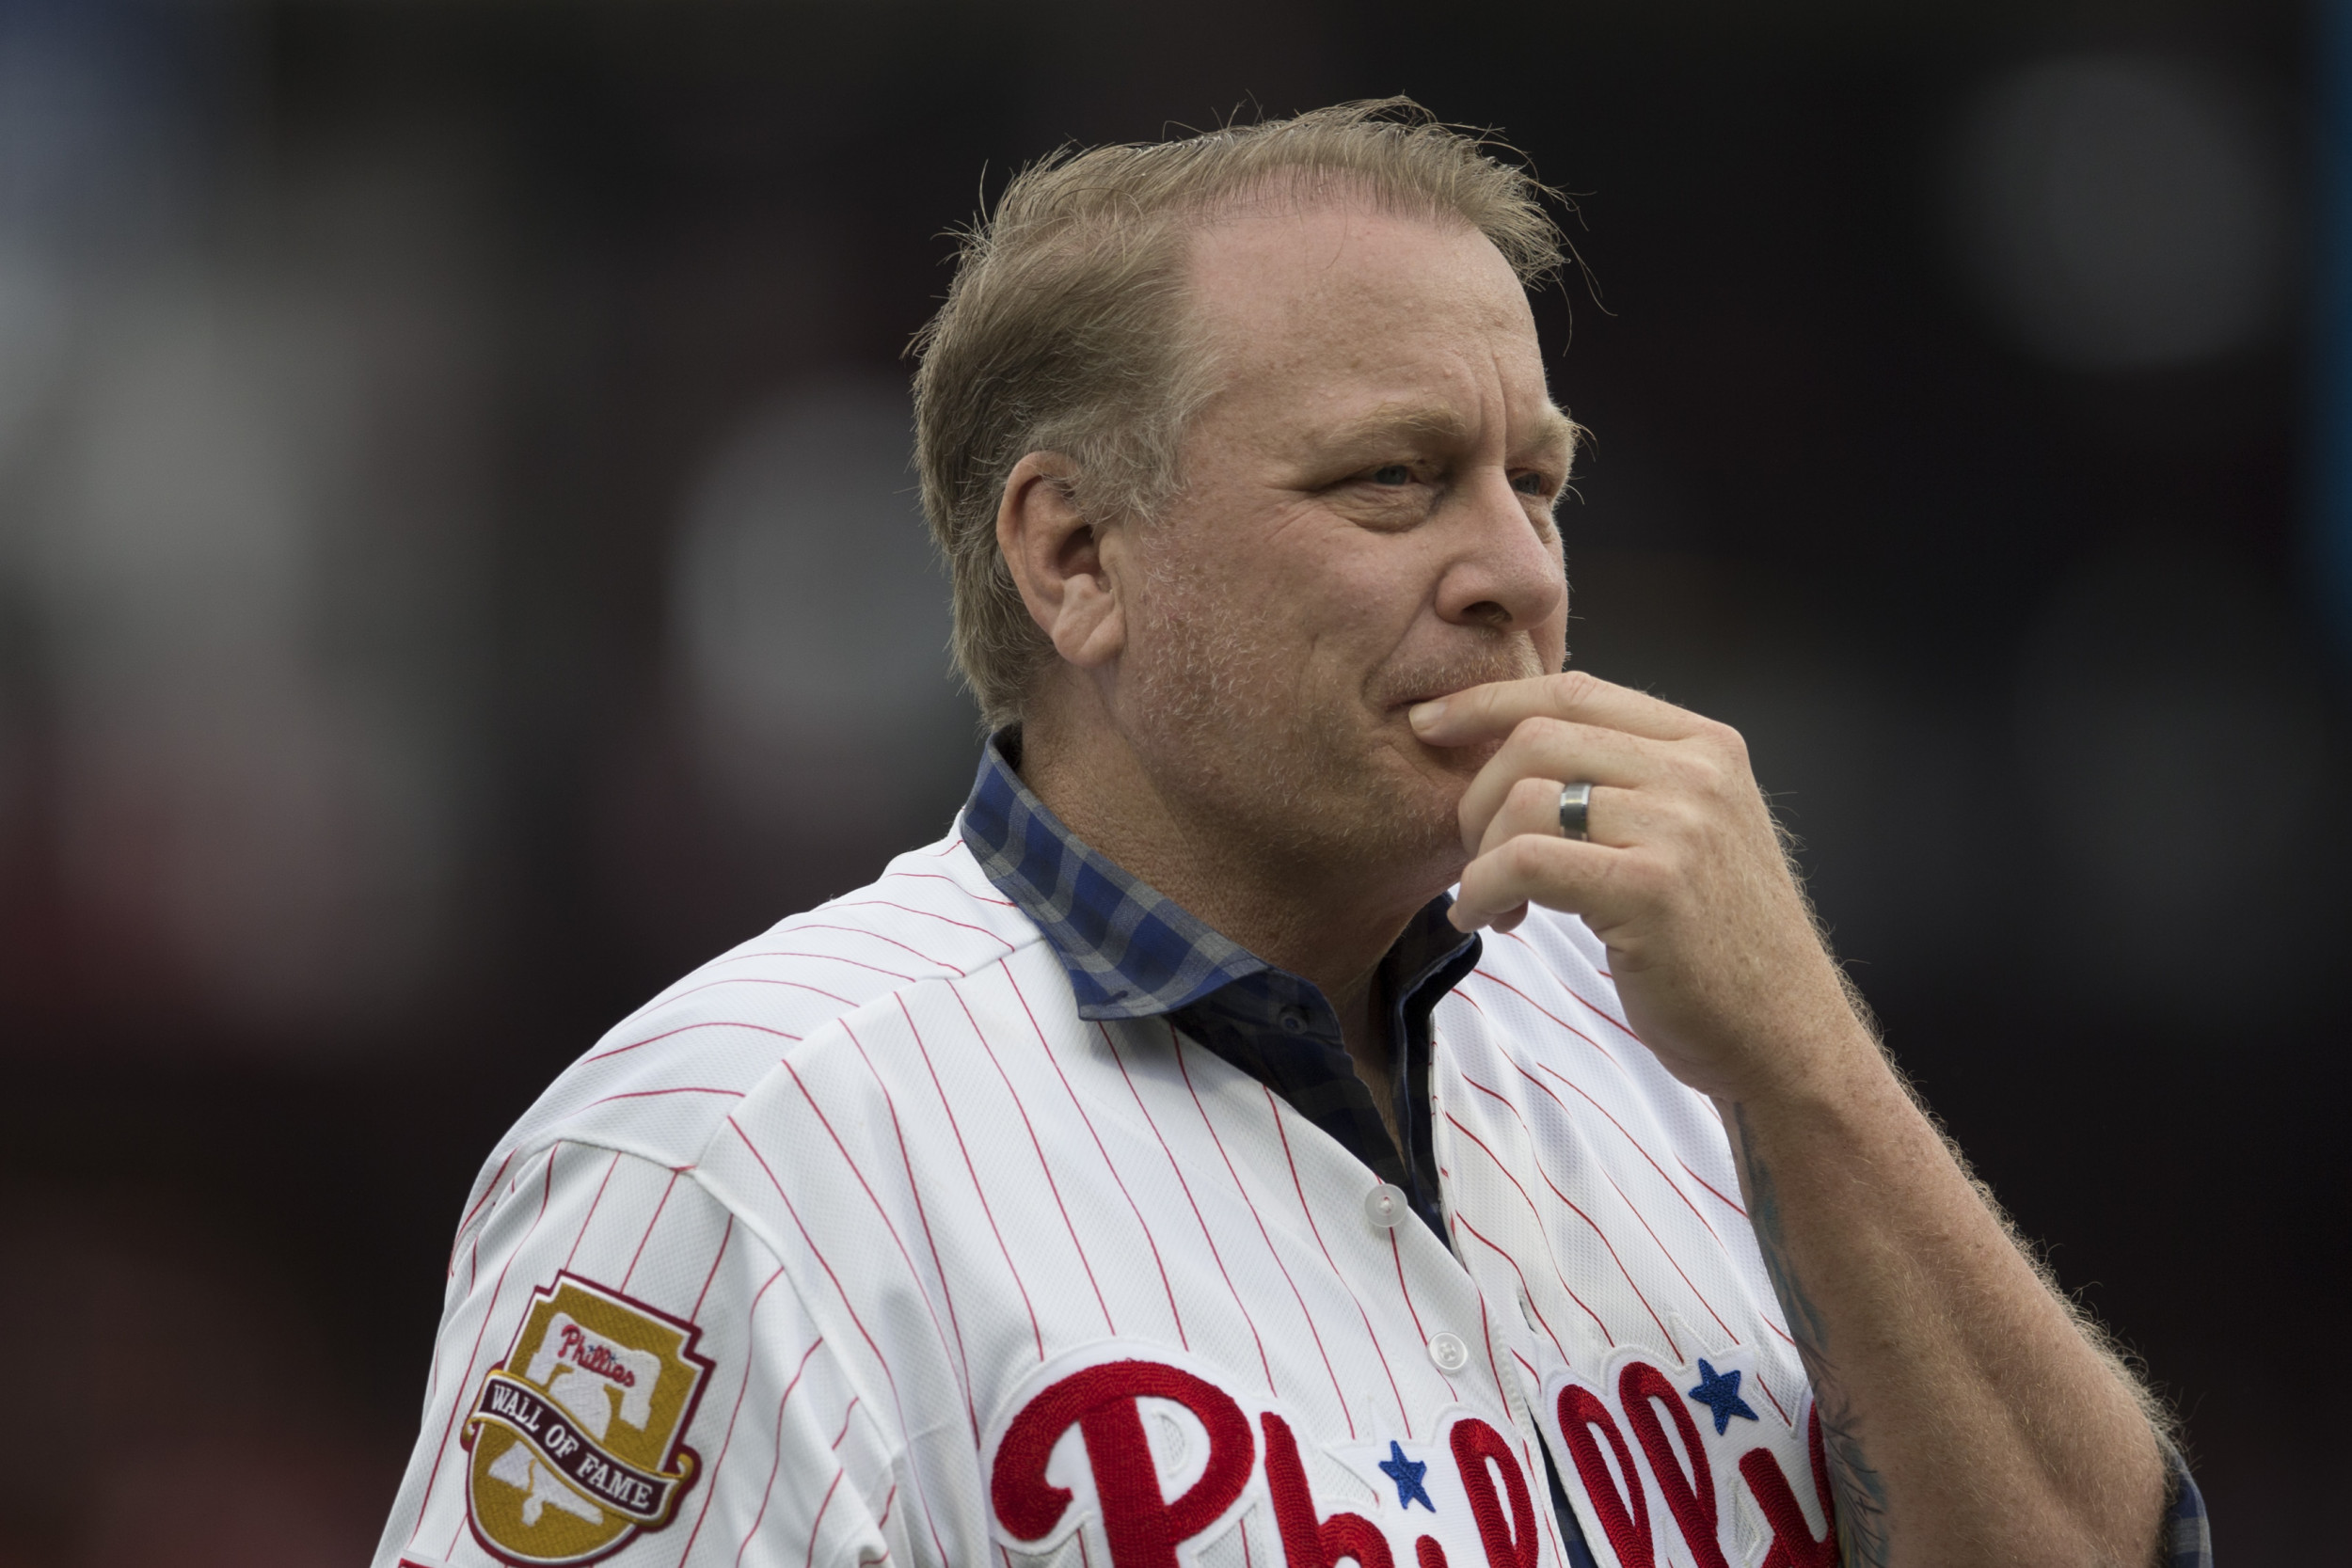 Curt Schilling Compares NASCAR's Bubba Wallace to Jussie Smollett